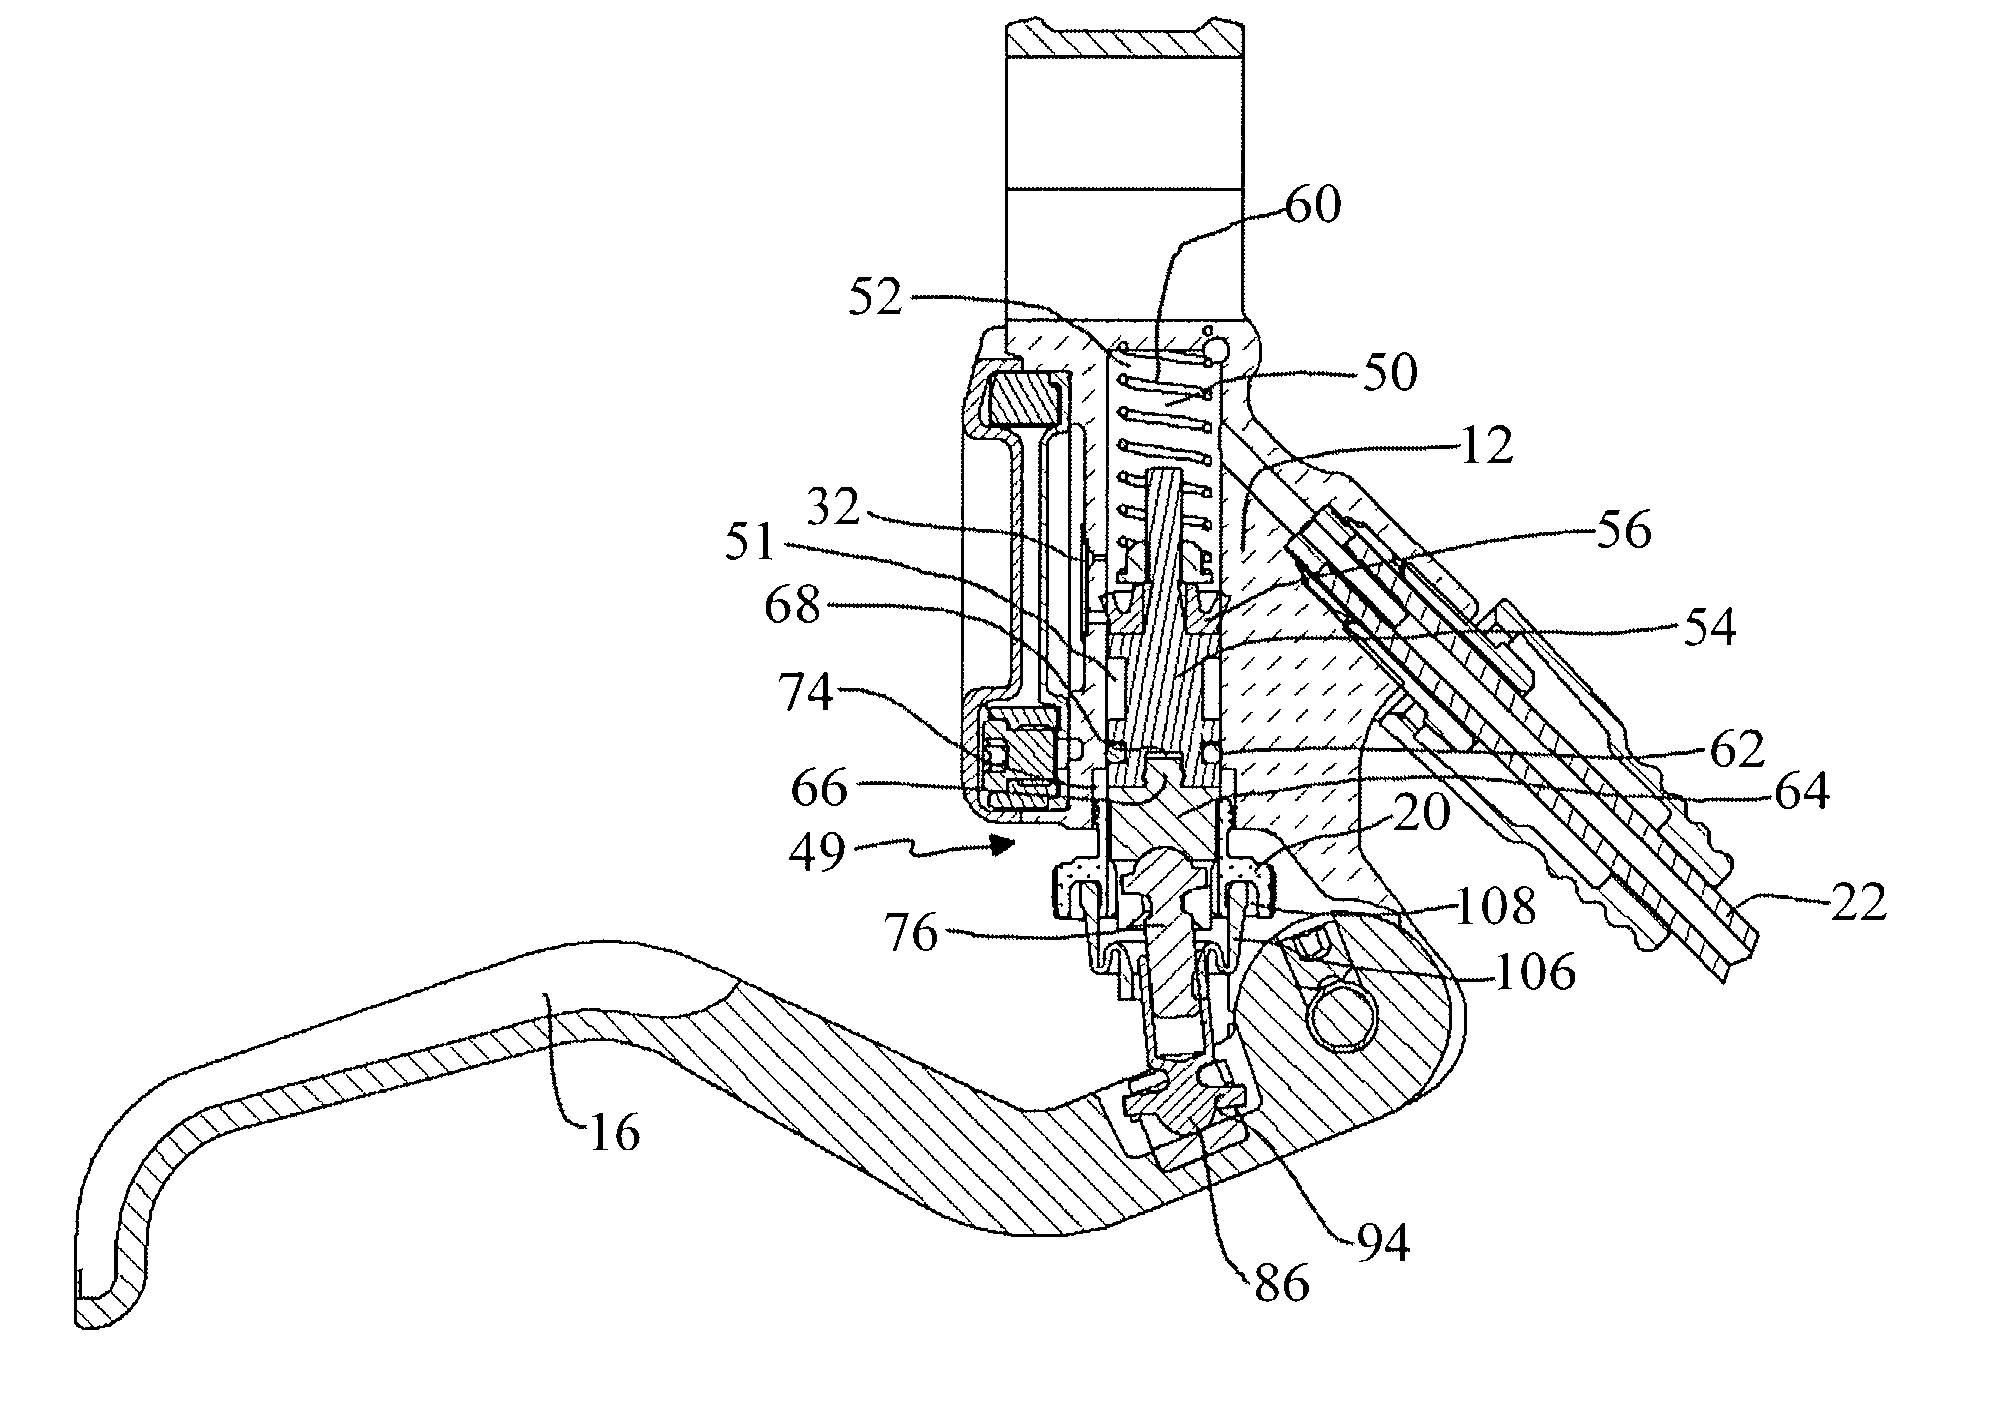 Master cylinder lever for a hydraulic disc brake having favorable handle pivot geometry